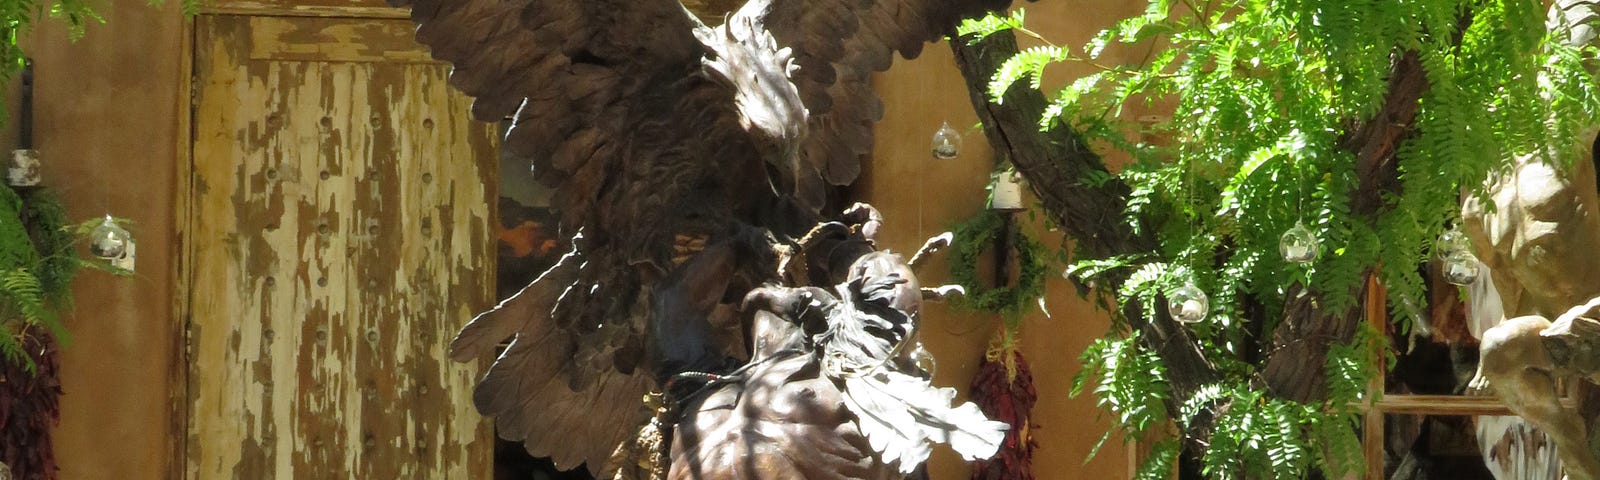 A lifesize bronze sculputure of a giant eagle attacking a muscular Native American Indian as he reels back in apparant pain, by artist Vic Payne in Santa Fe New Mexico